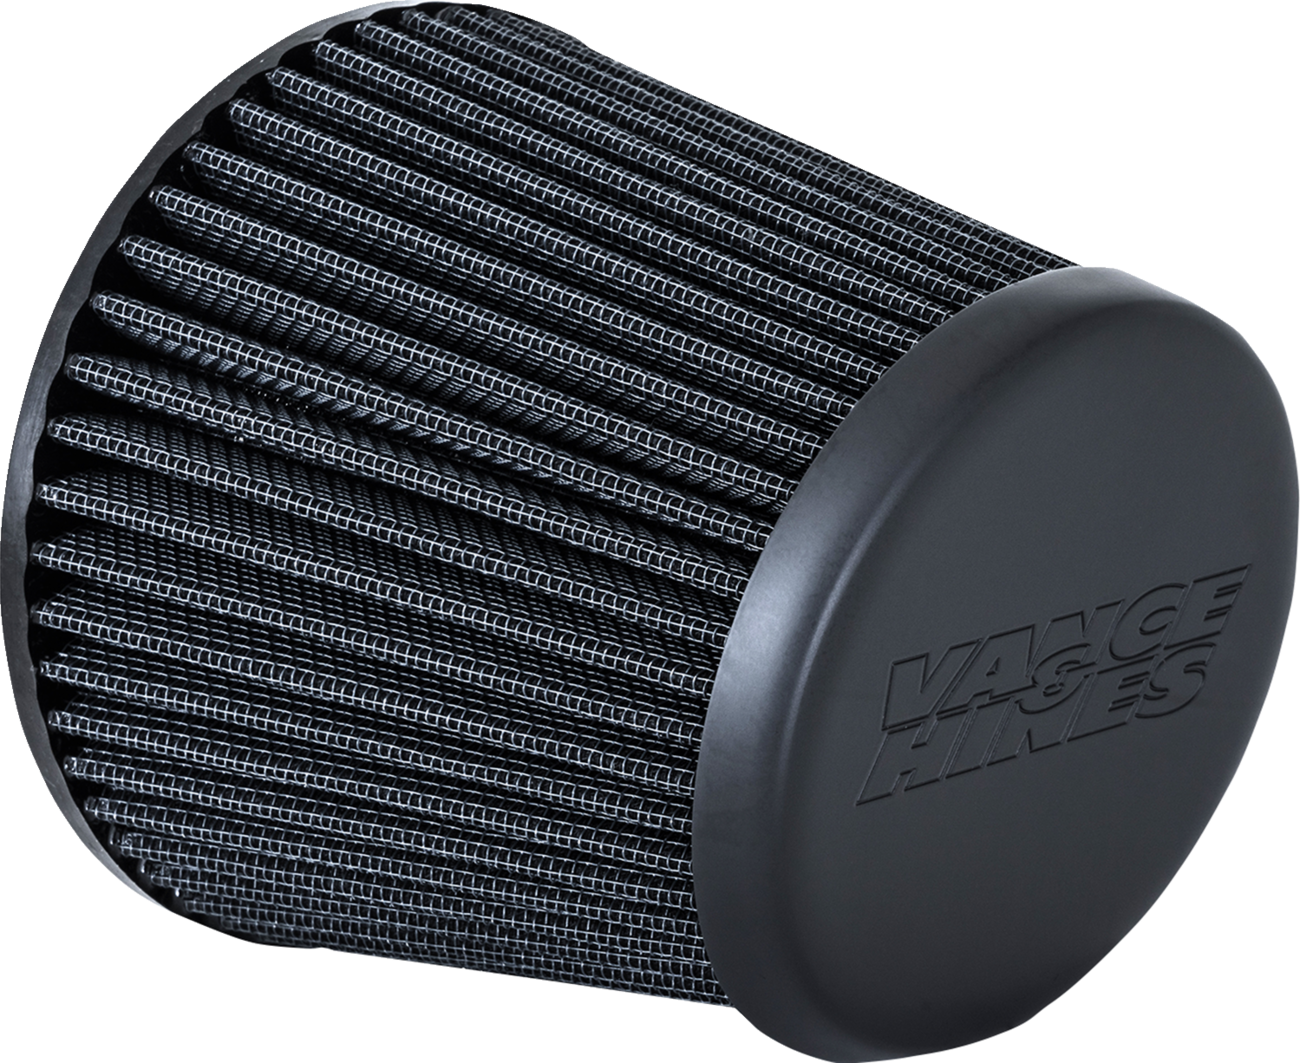 Vance & Hines Black VO2 Falcon Air Filter Replacement for Harley Davidson